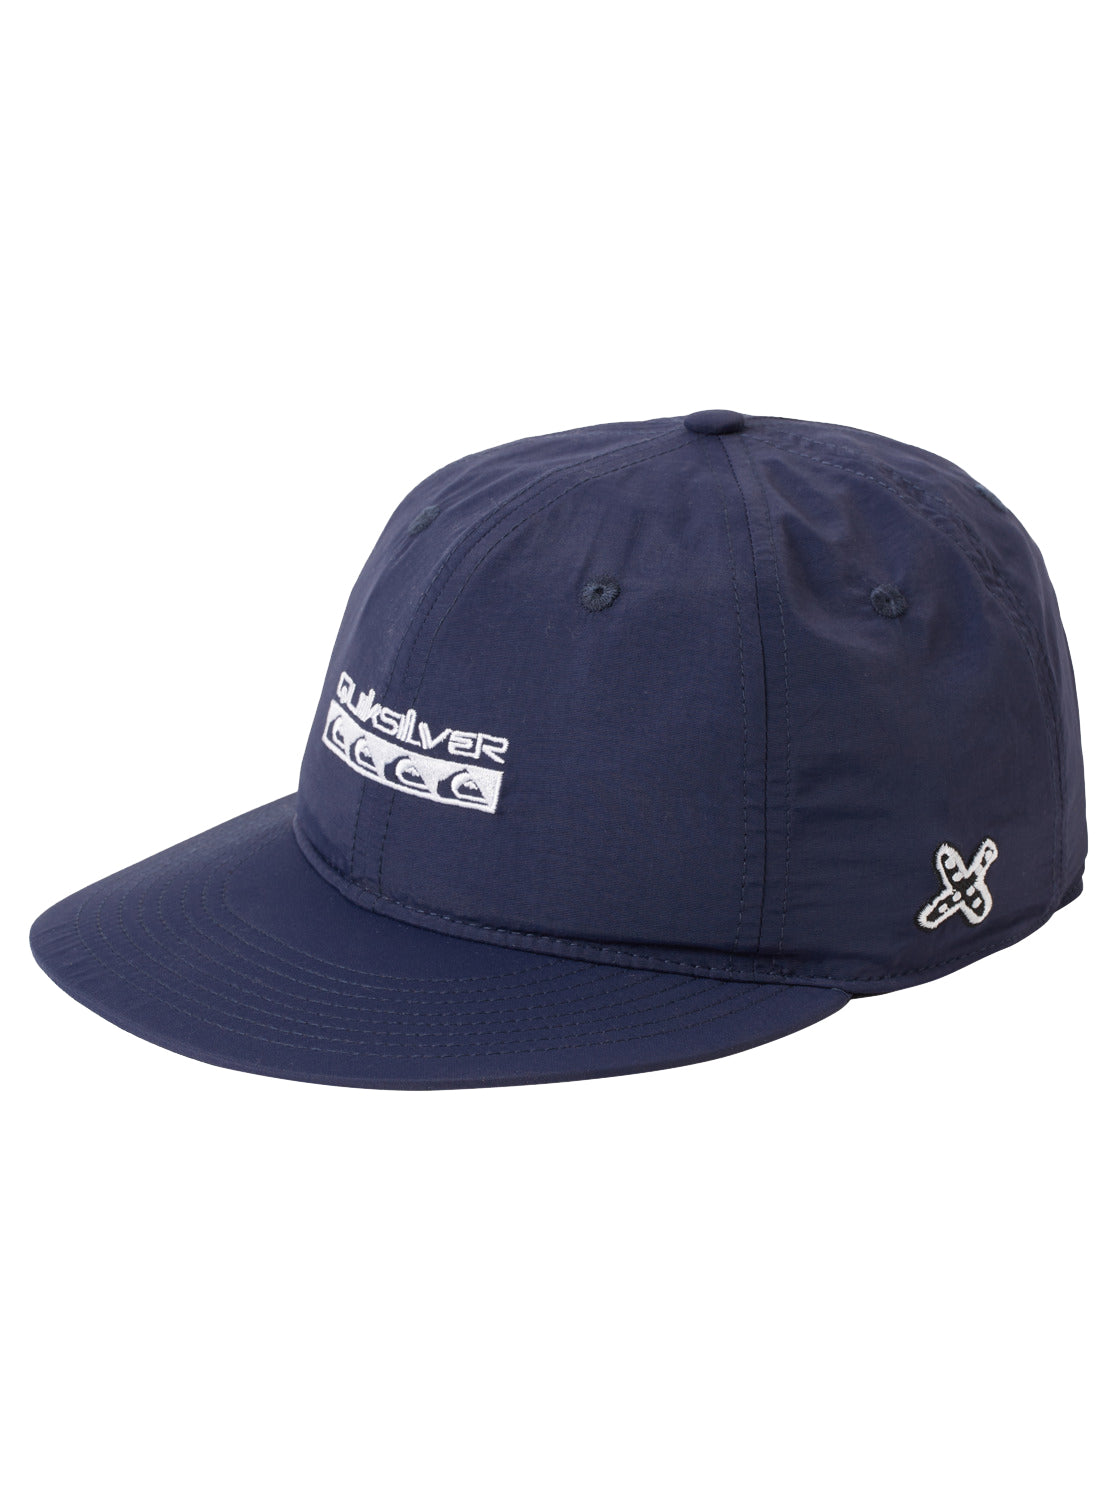 Quiksilver Eve Minded Snapback Hat